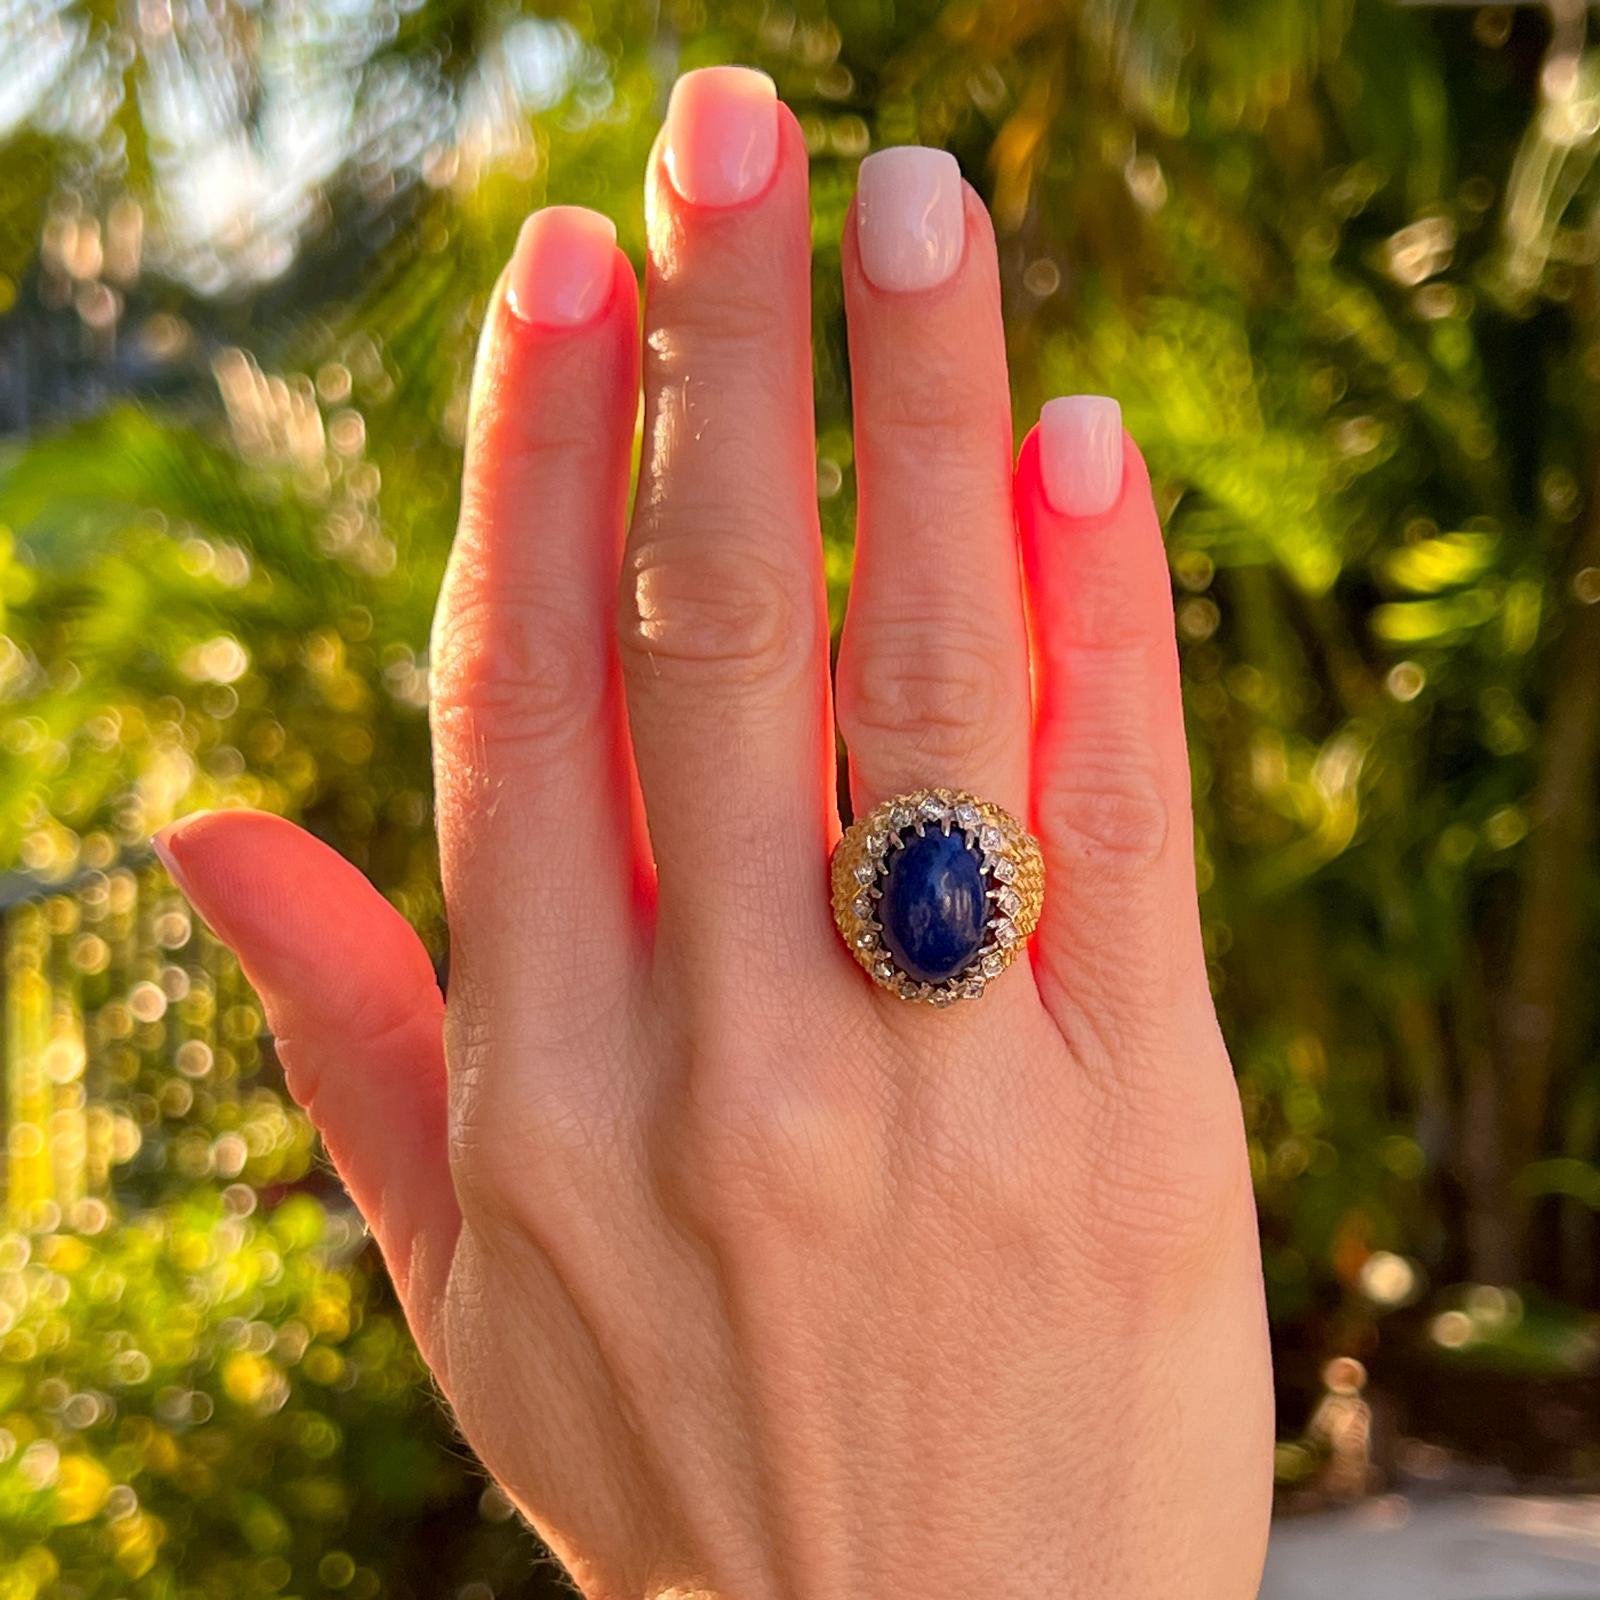 Beautiful lapis lazuli cocktail ring handcrafted in textured 18 karat yellow gold. The ring features a cabochon blue lapis gemstone set with 17 surrounding diamonds weighing approximately .15 CTW. The ring measures 20mm in width, and is currently